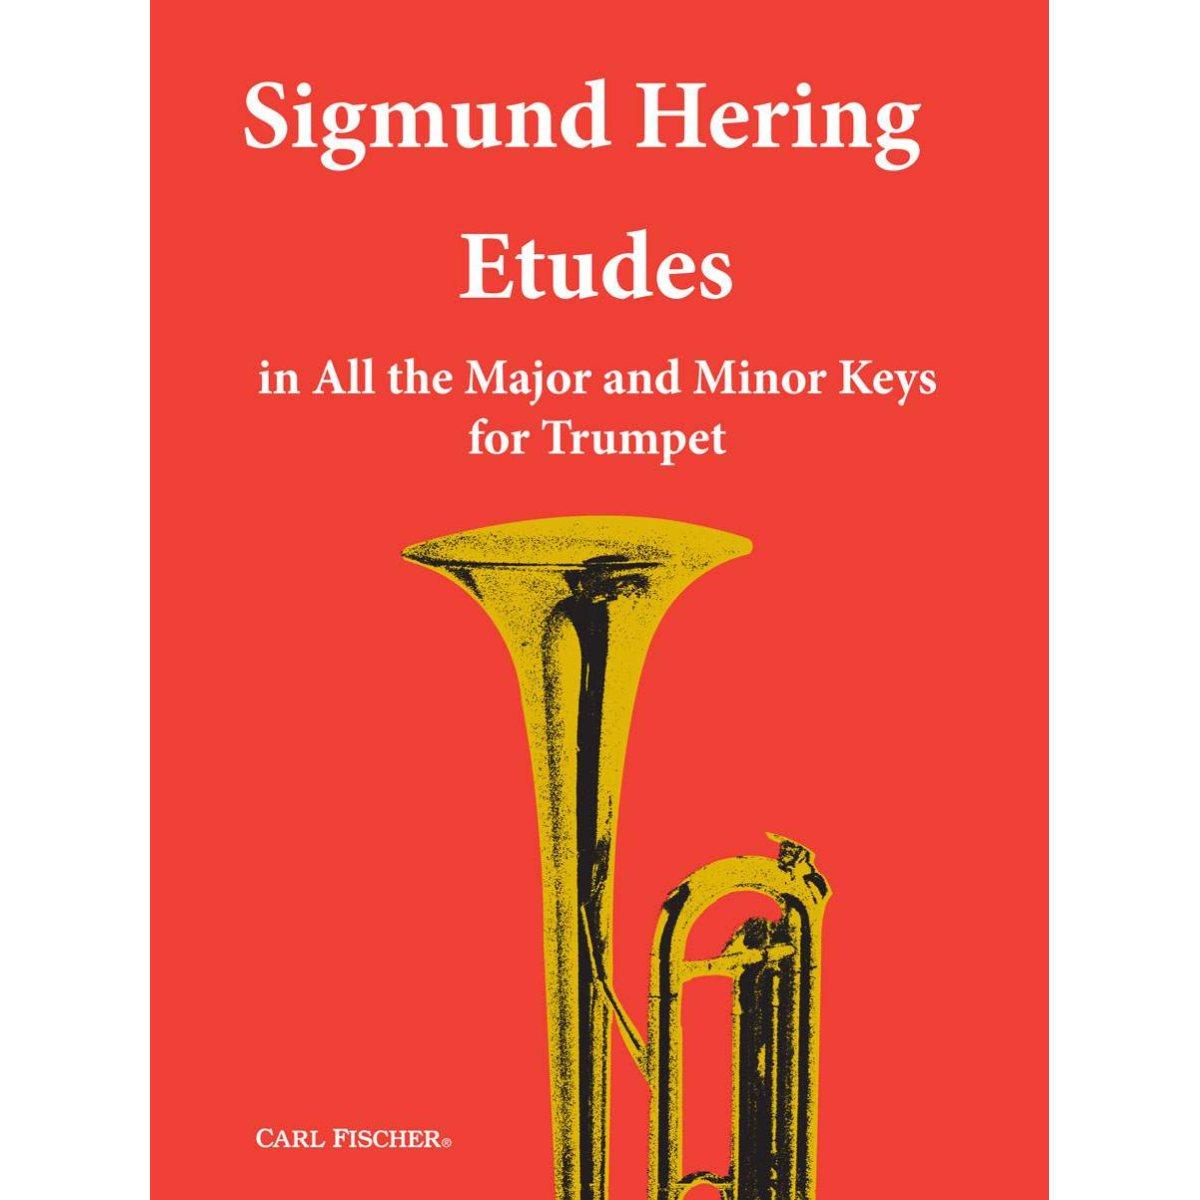 Sigmund Hering: Etudes in all the major and Minor Keys for trumpet